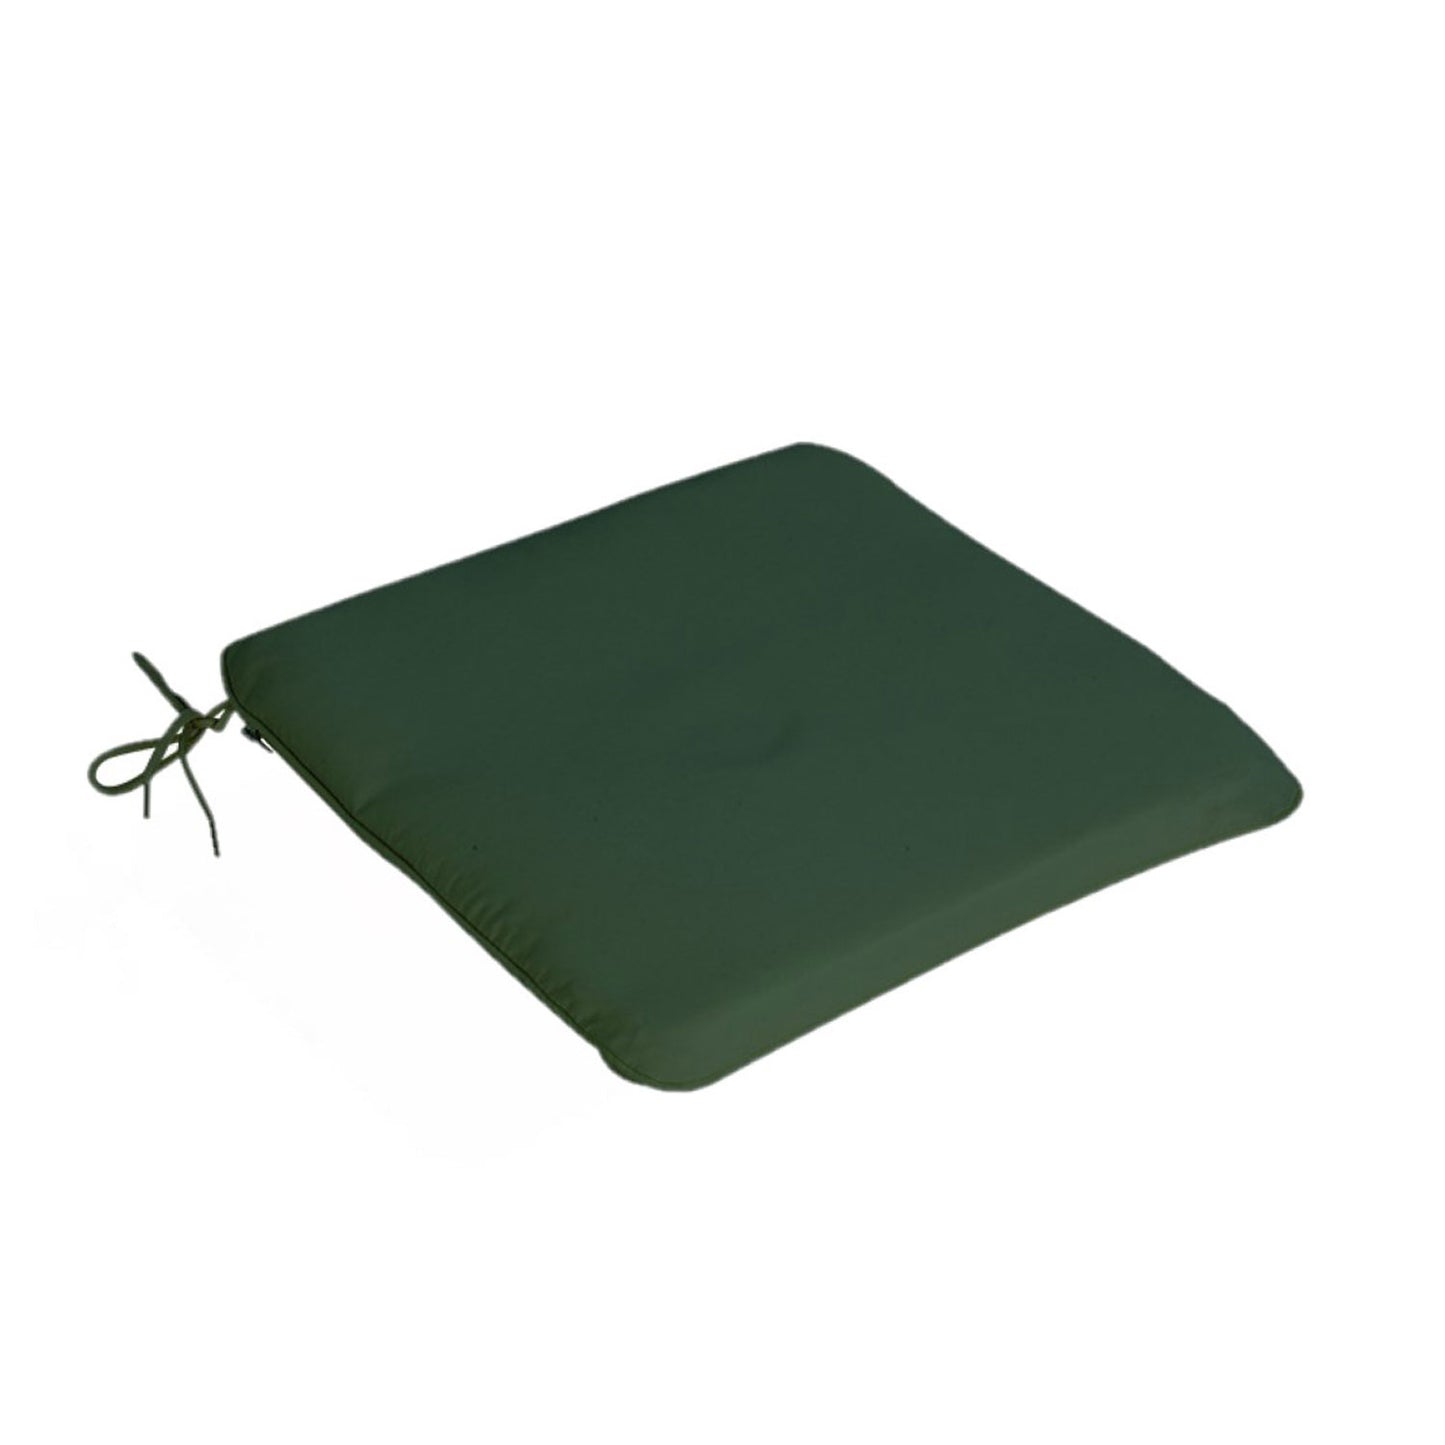 CC Collection Green Garden Seat Pad (Pack of 2)